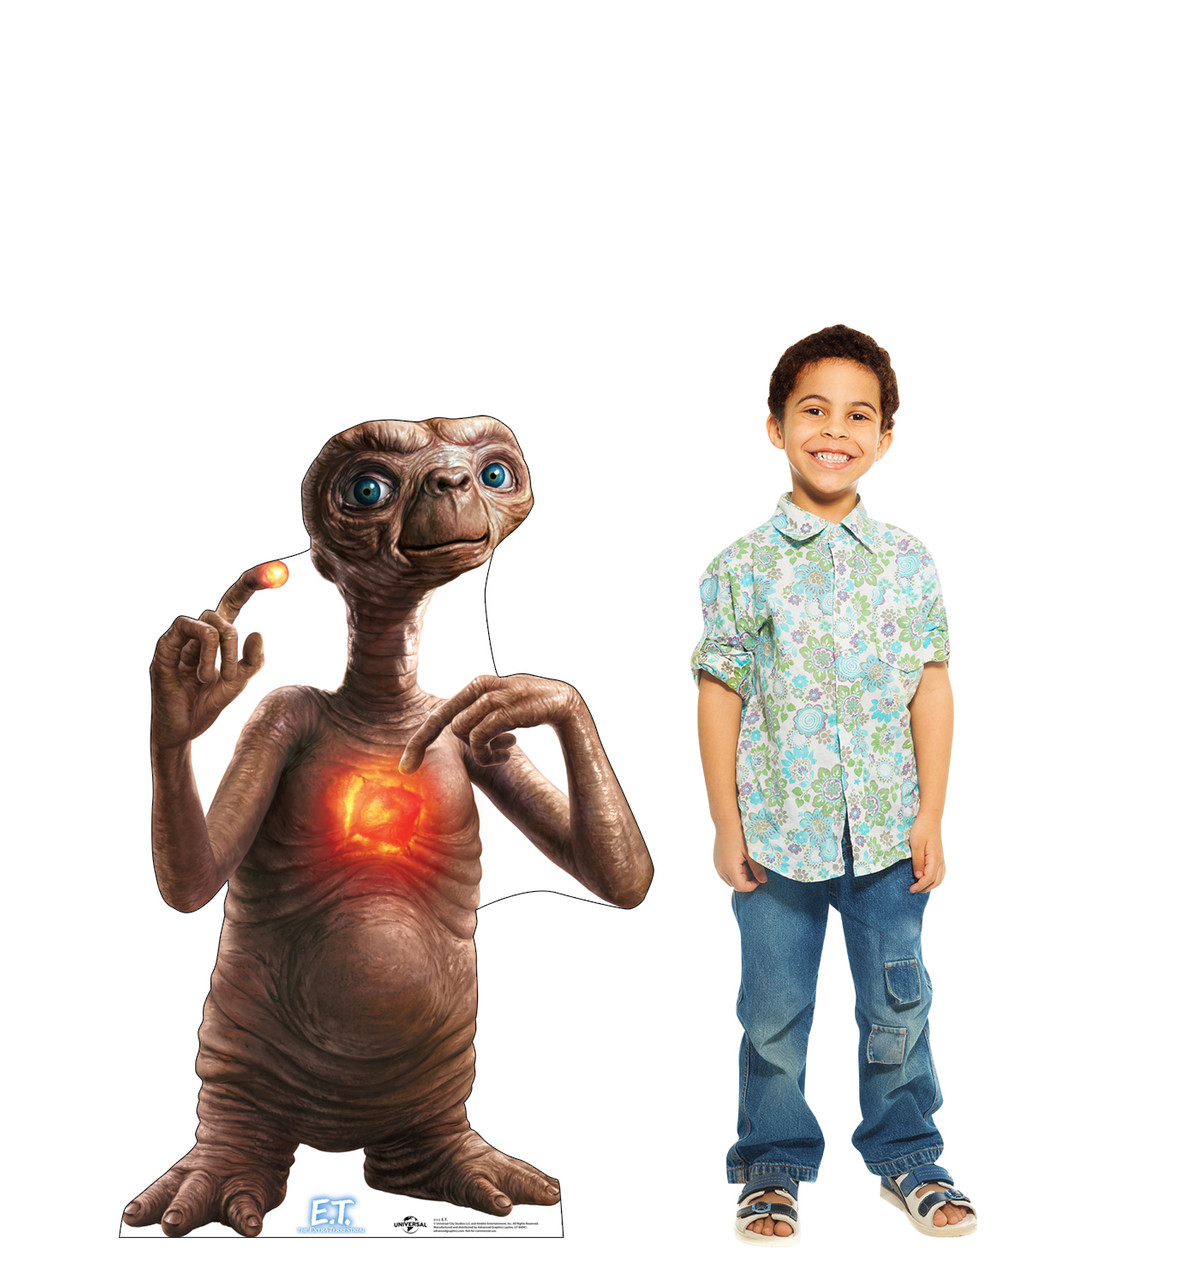 Life-size cardboard standee of E.T. with model.